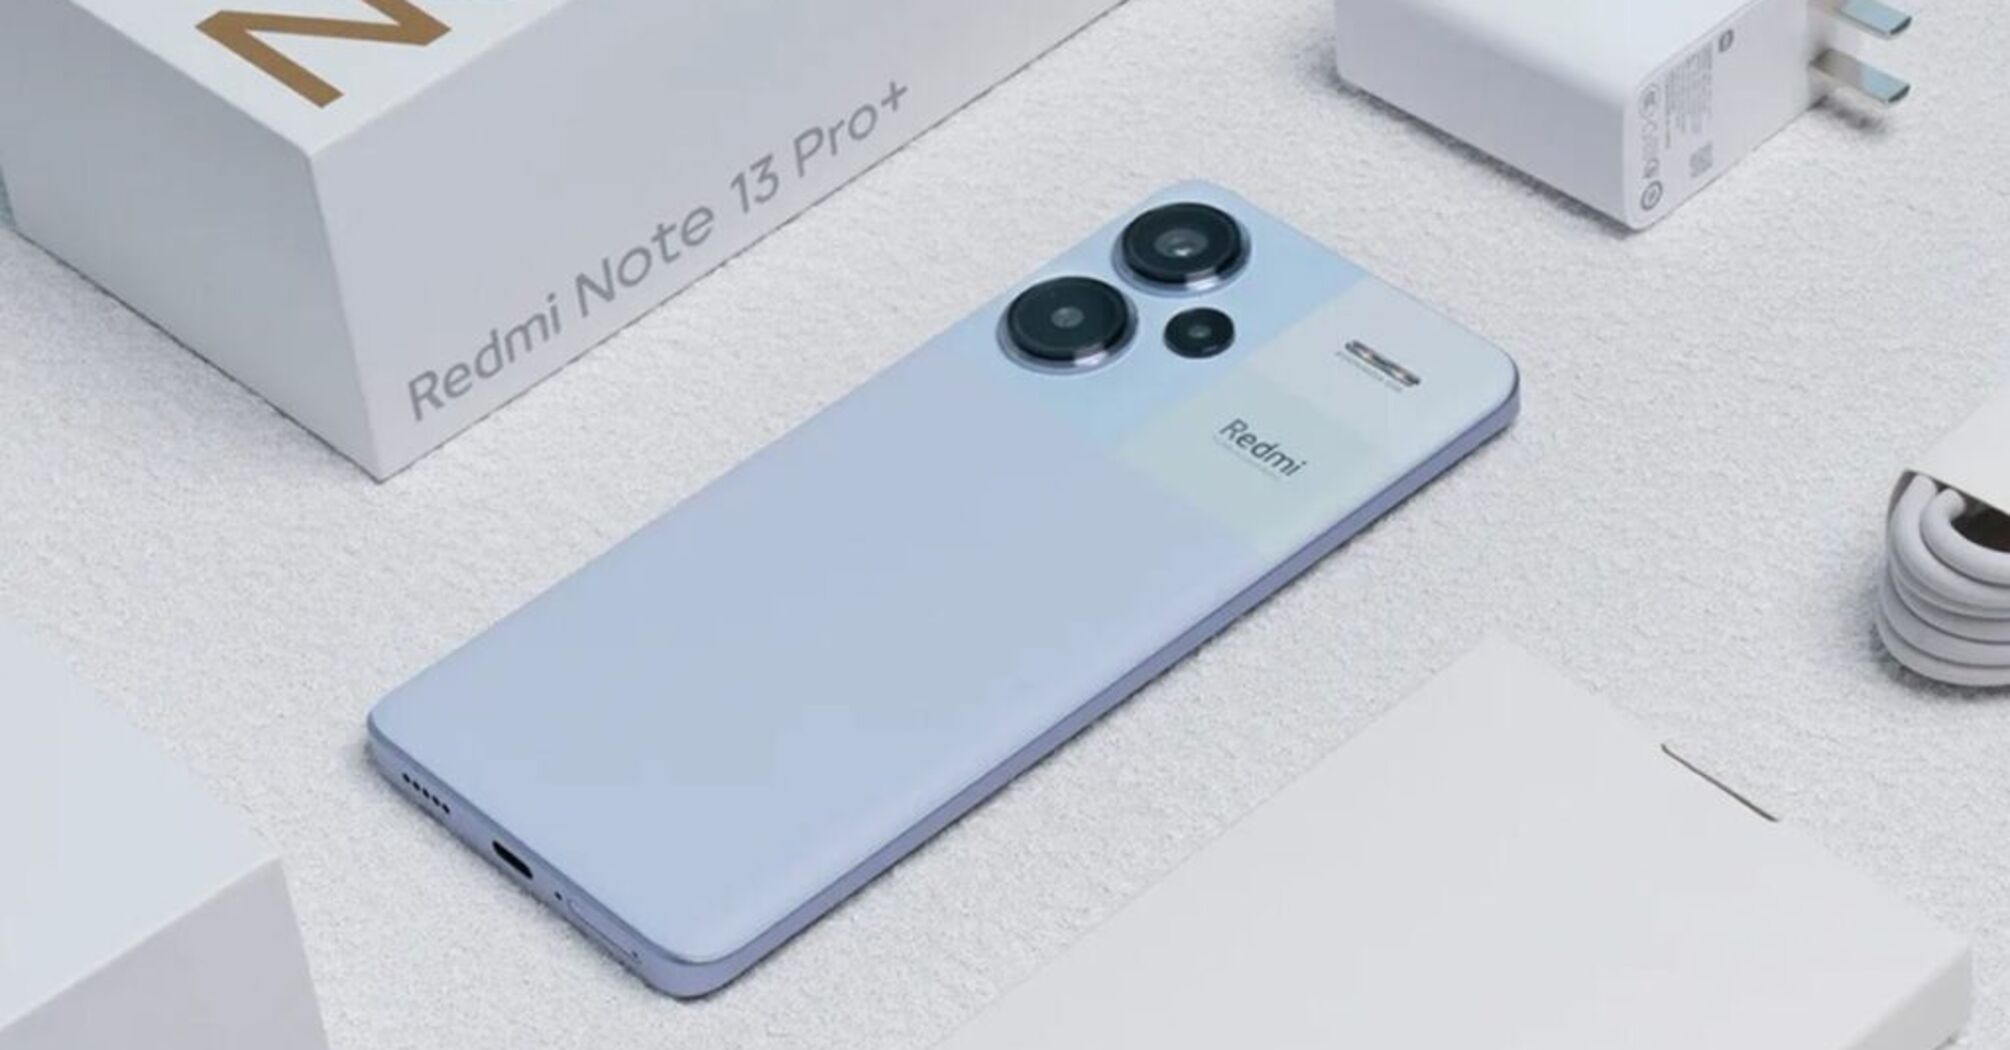 Redmi Note 13 Pro+ smartphone: features and availability